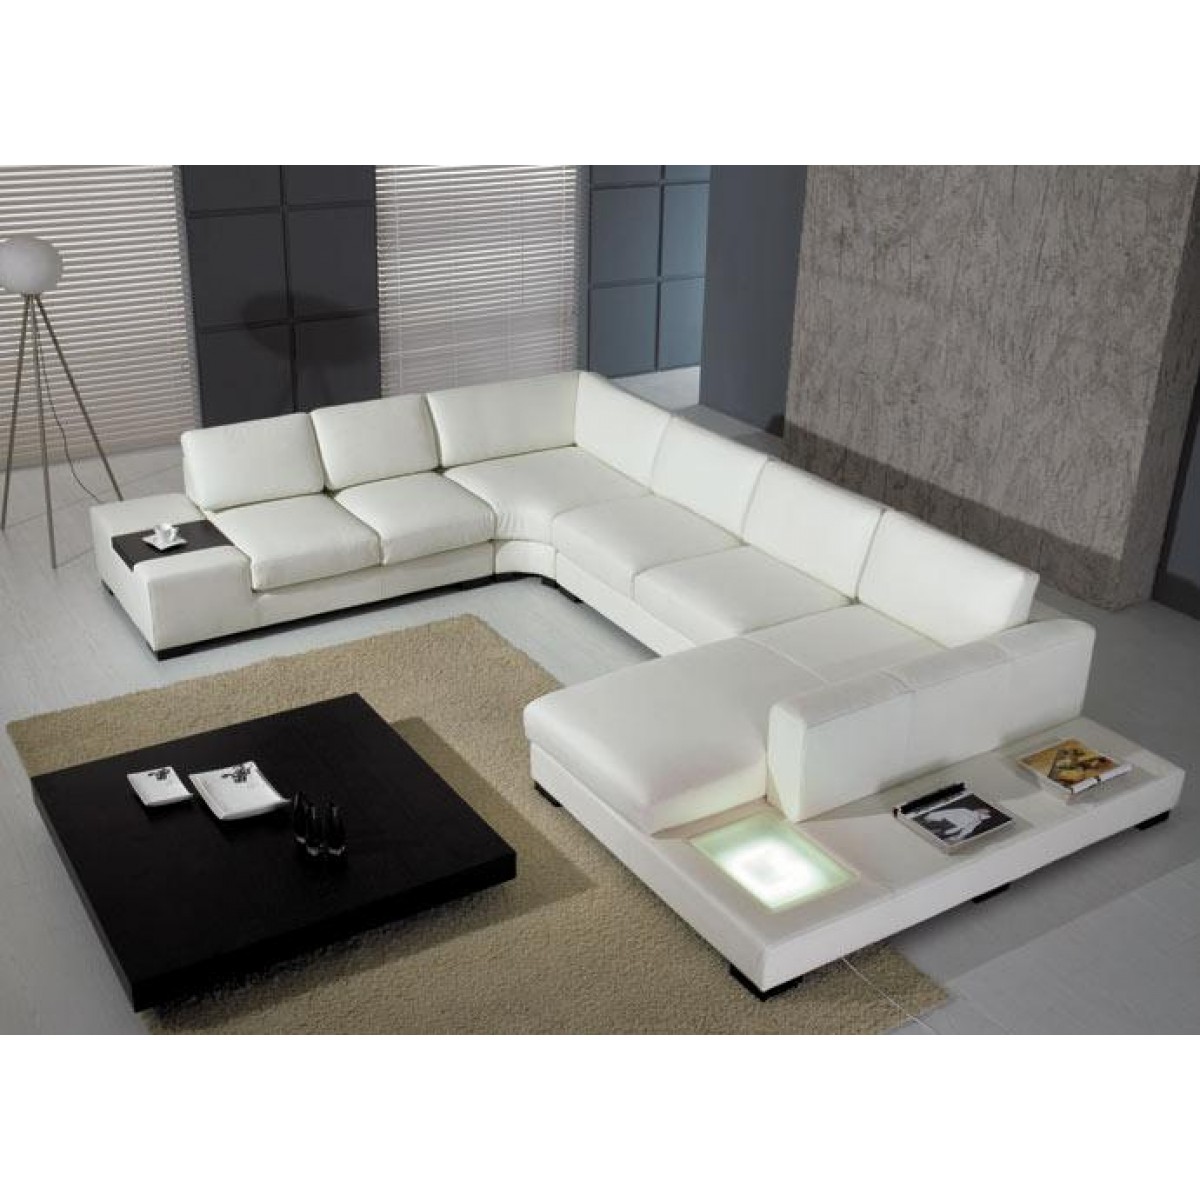 T35 White Leather Sectional, Modern White Leather Sofa Living Room Design